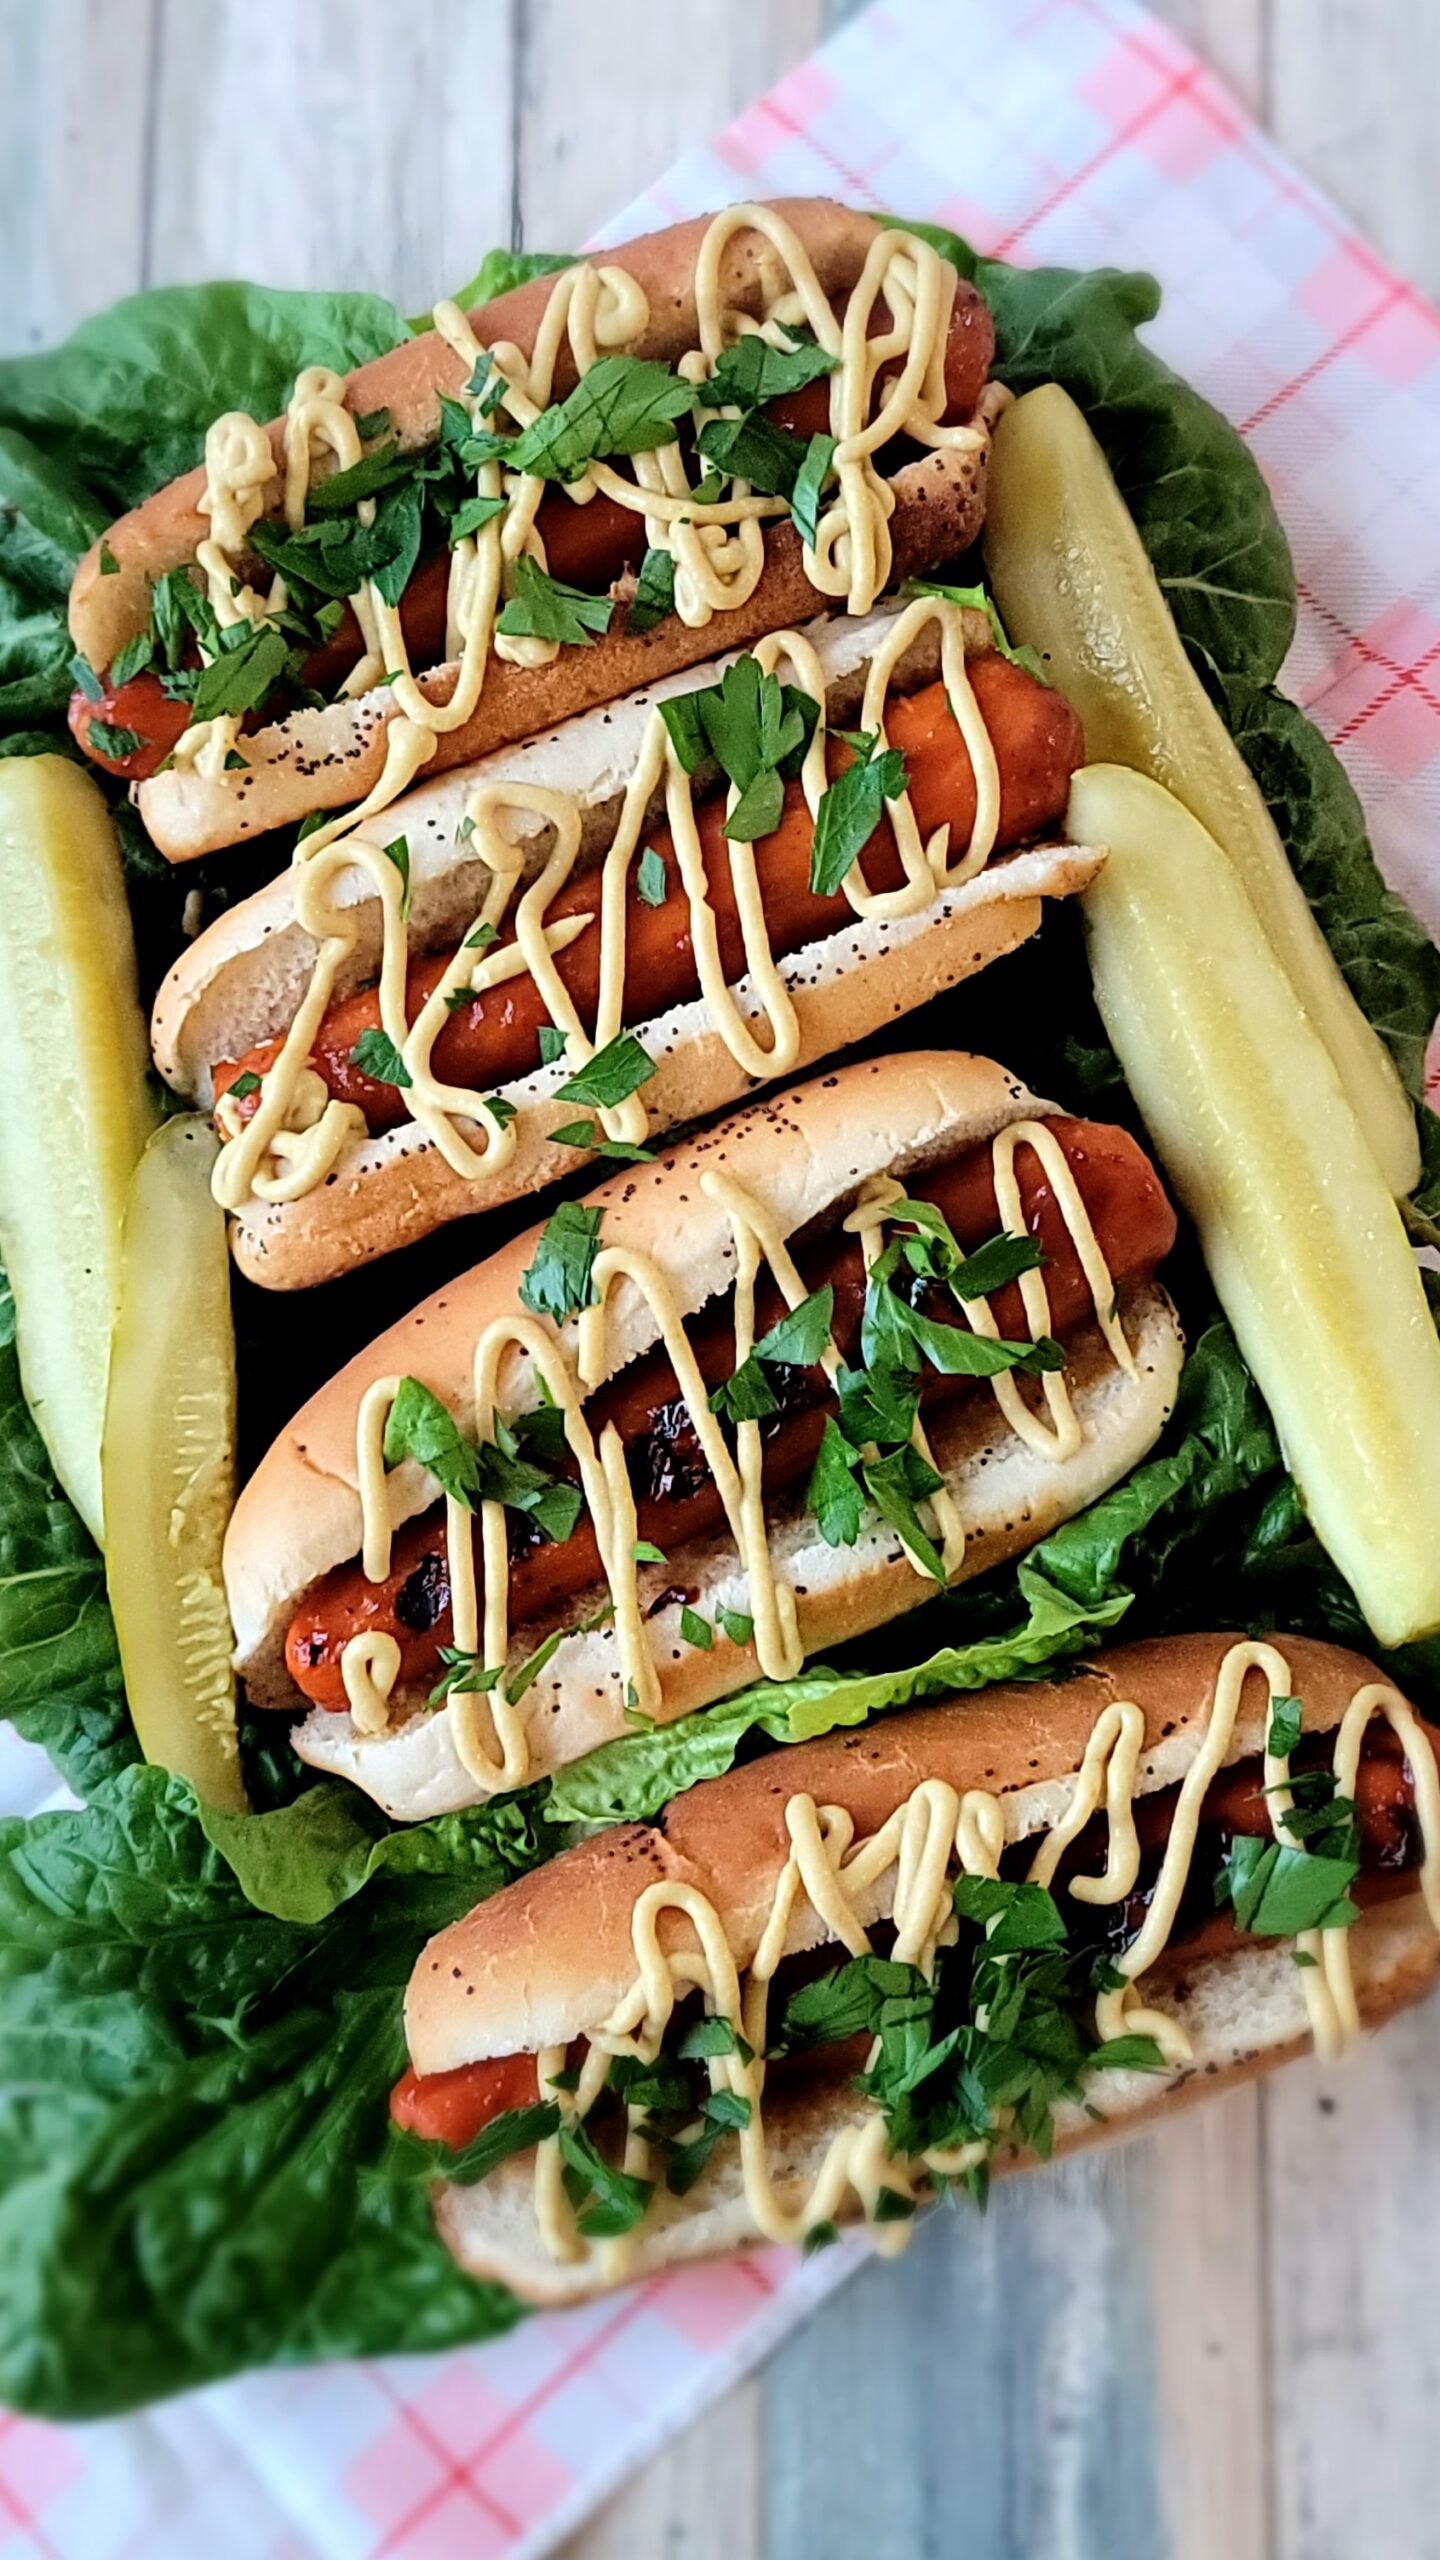 Barbecued Carrot Hot Dogs